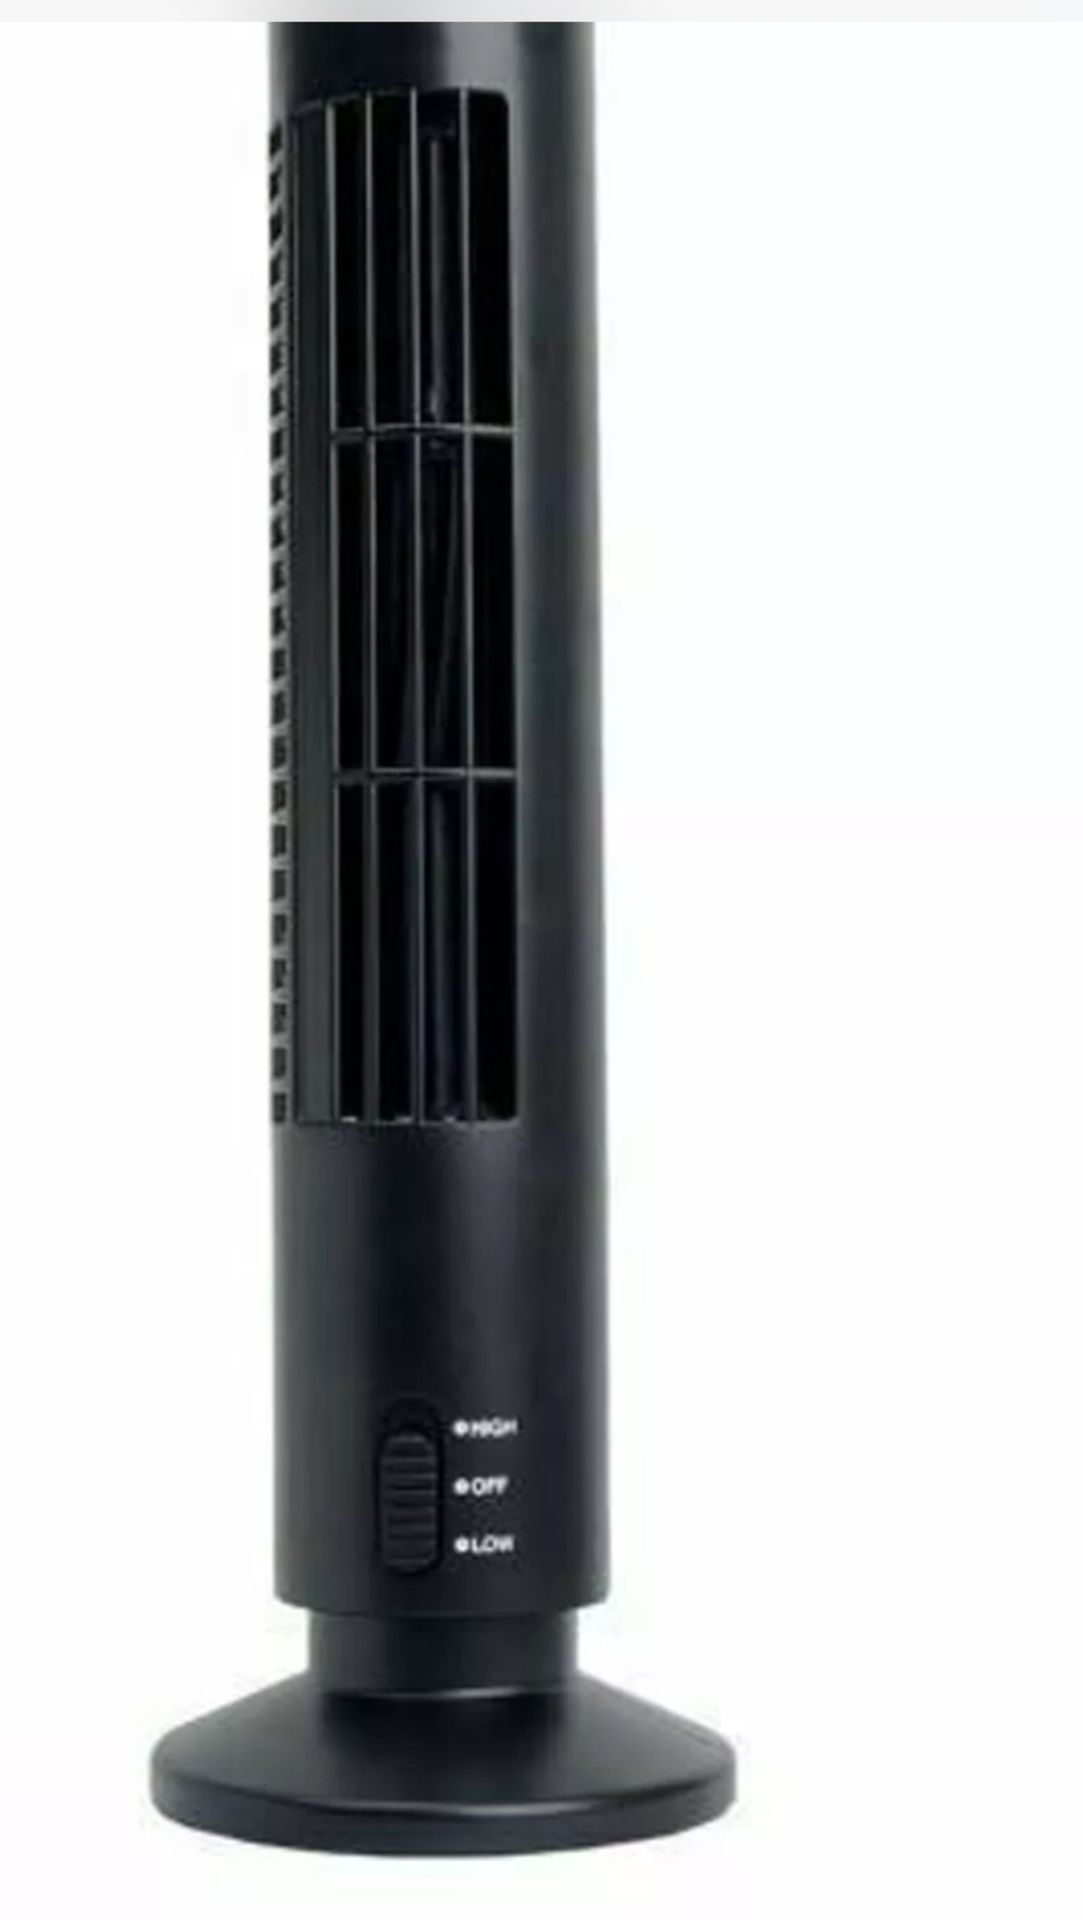 Brand New Portable Usb Tower Fan Cooling Bladeless 2 Speed Air Conditioner Pc Laptop Desk - Image 3 of 3